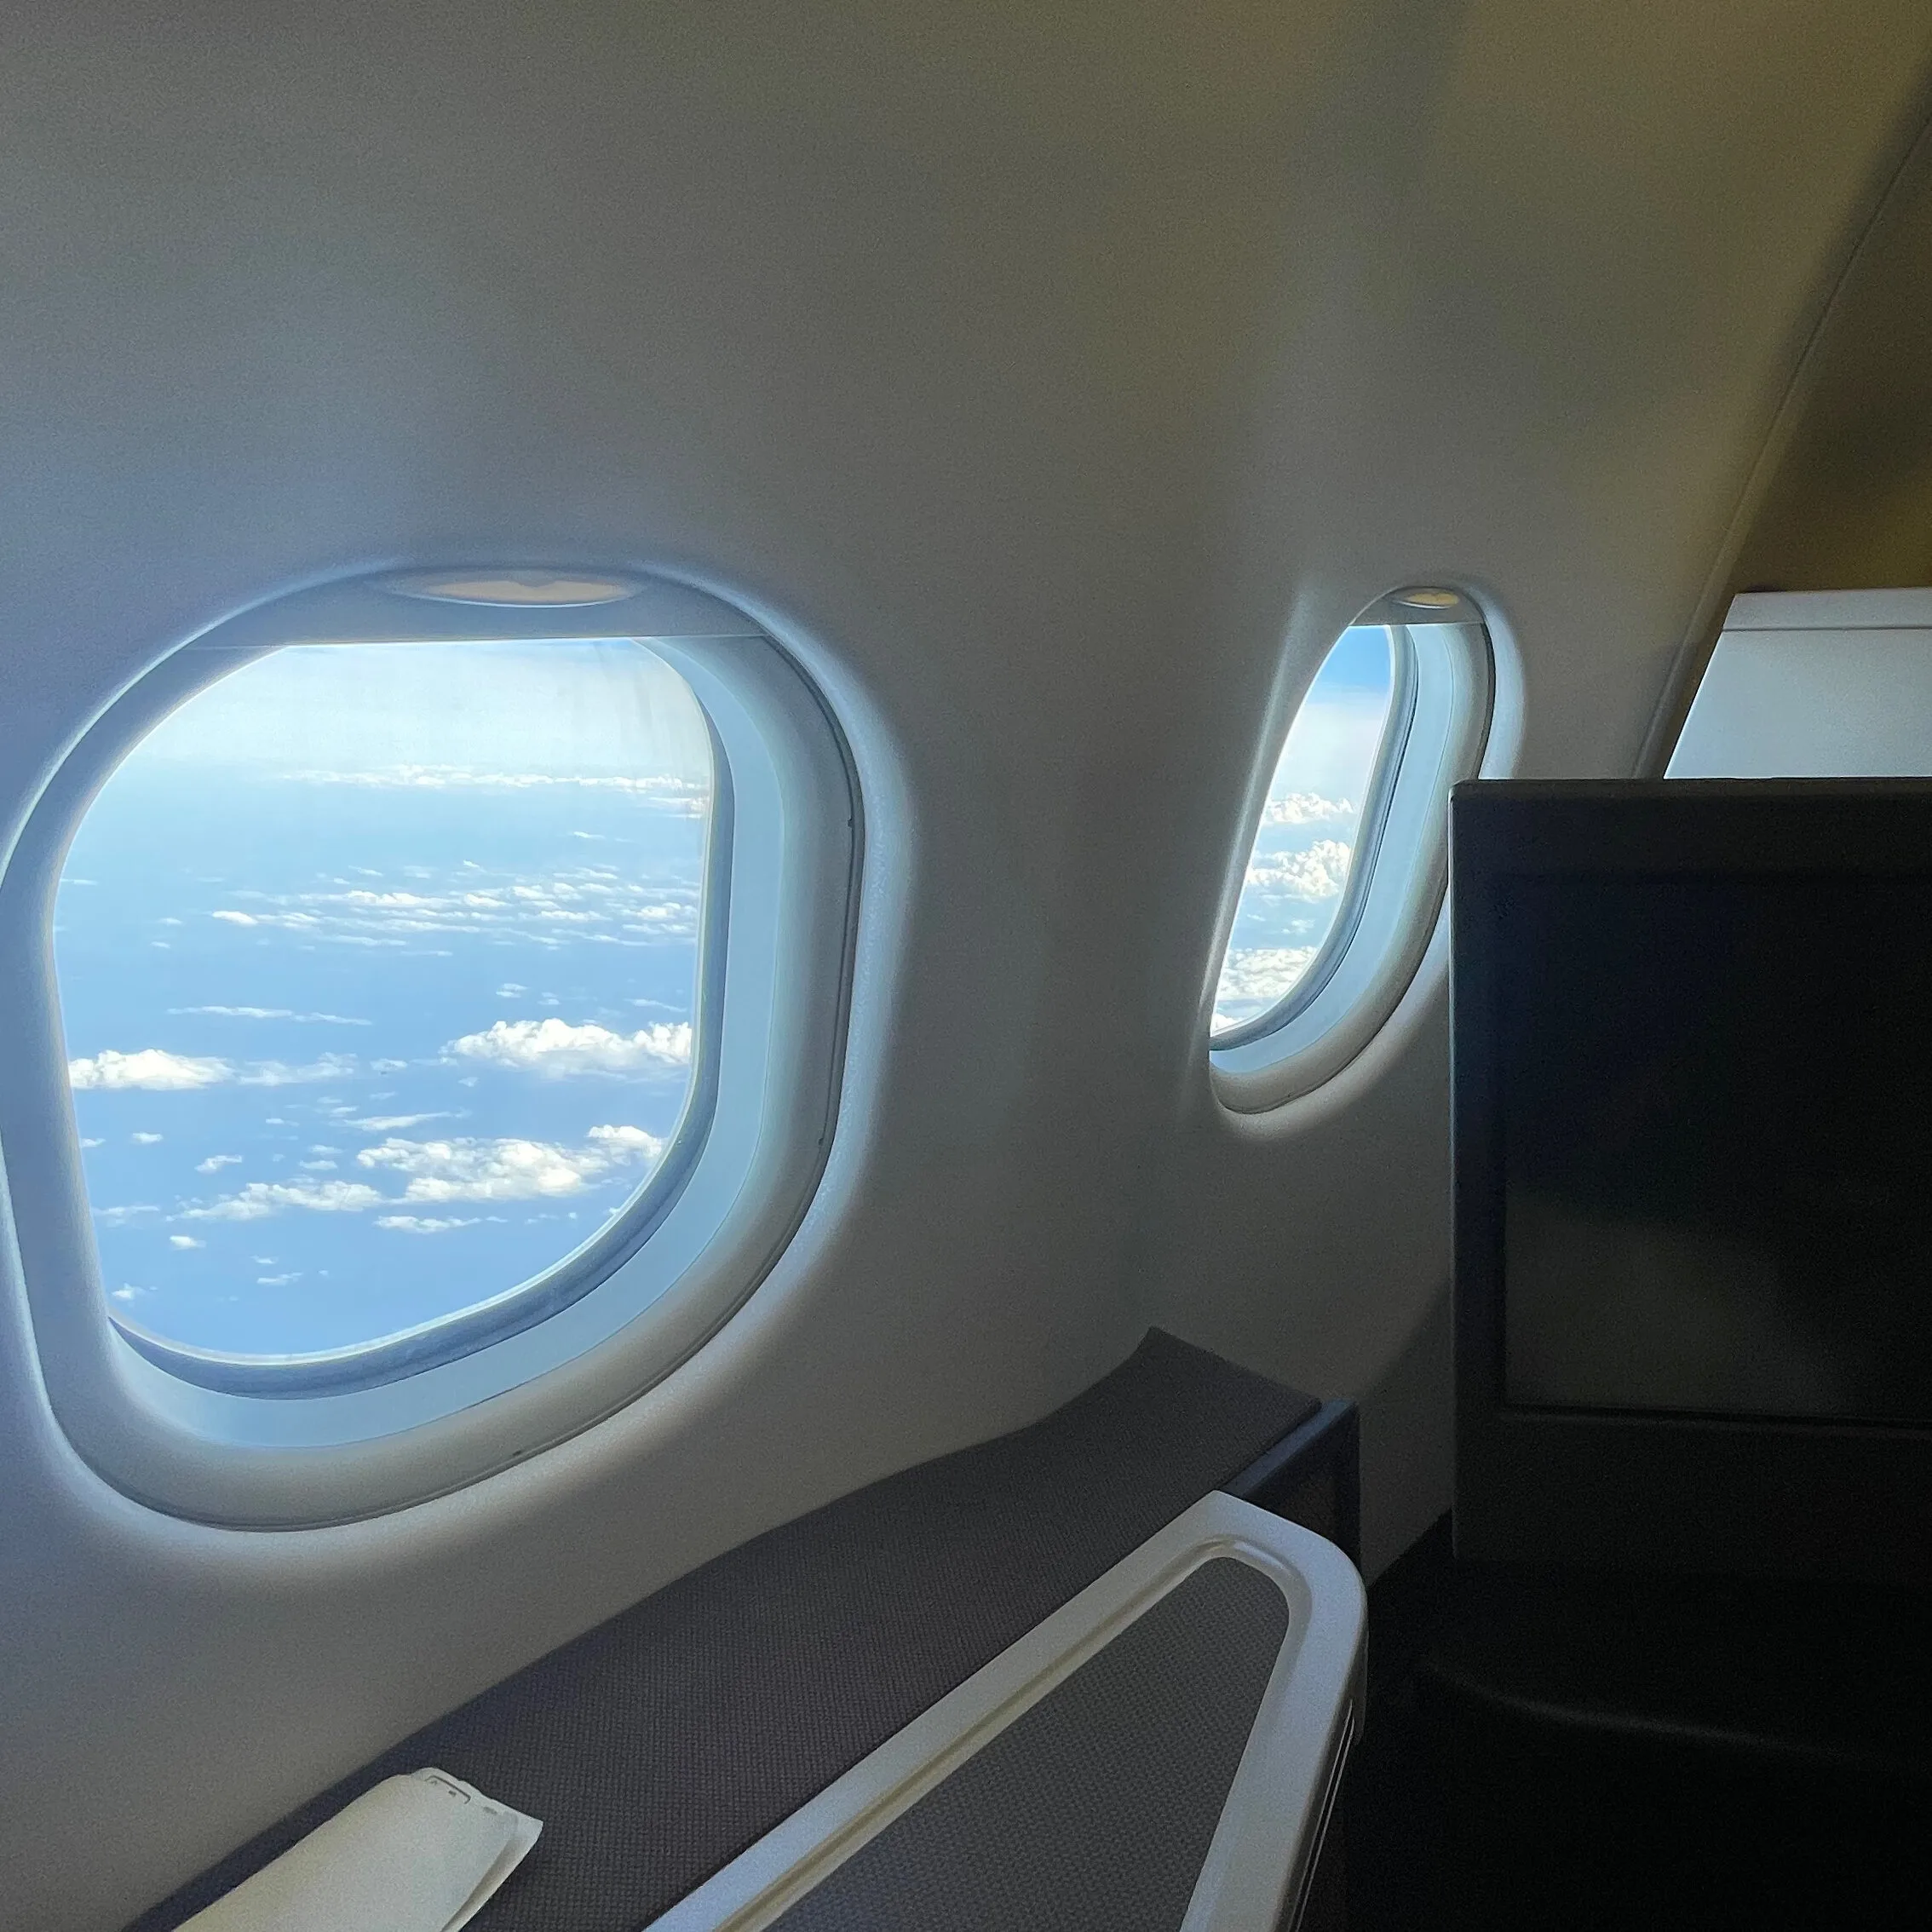 Forward of the Wing Business Class Seat